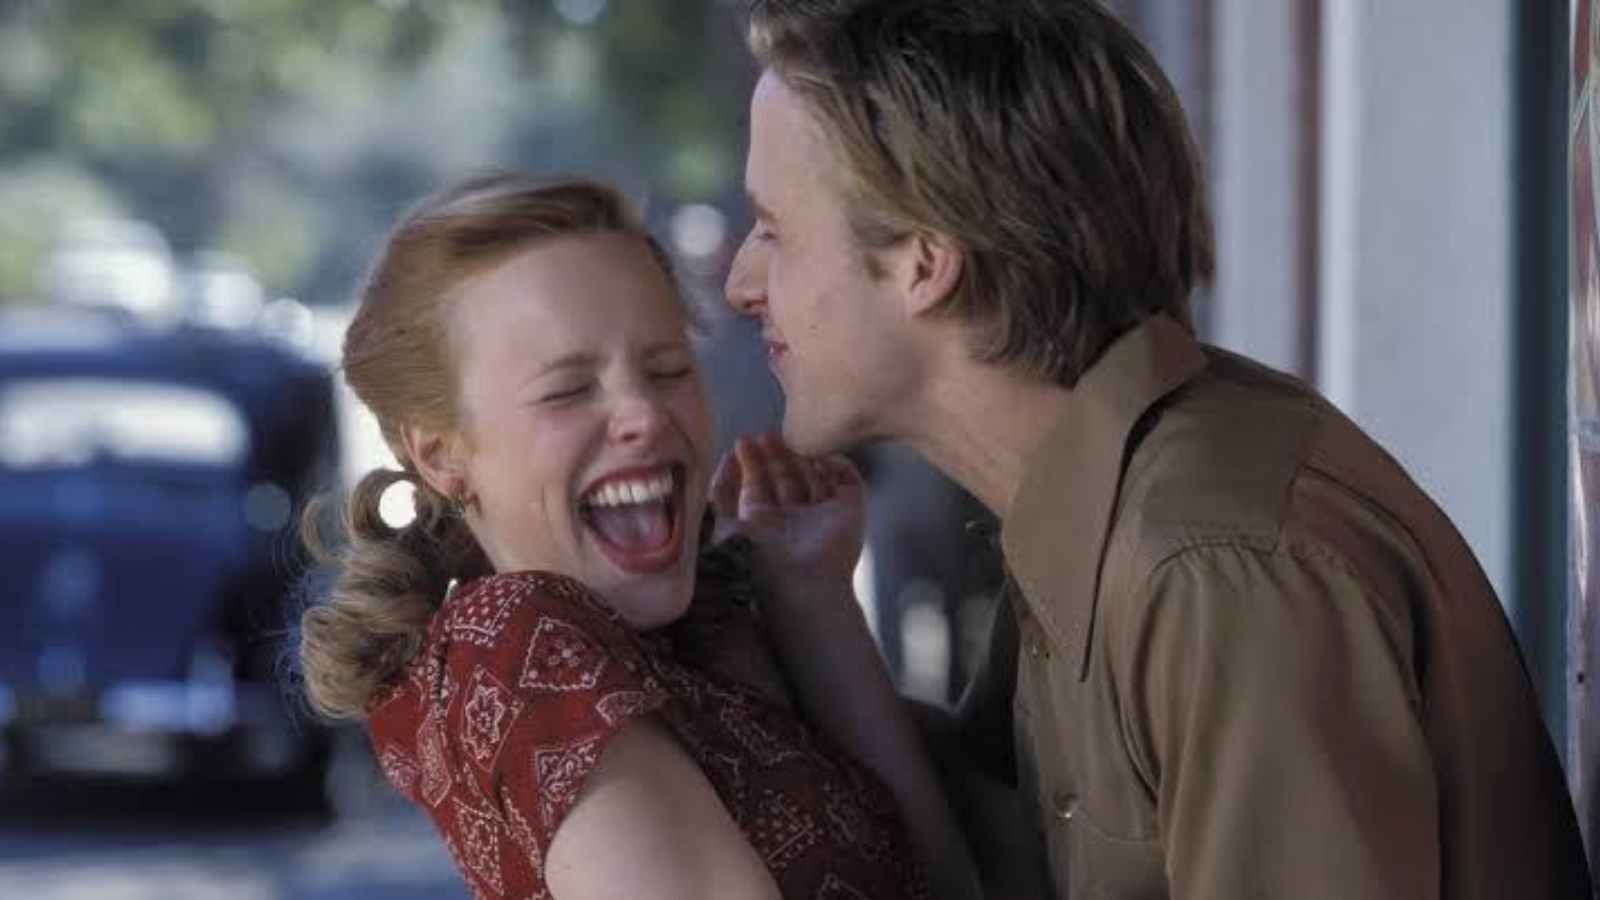 The Notebook's Allie and Noah are one of the Top 10 movie couples who made us believe in love